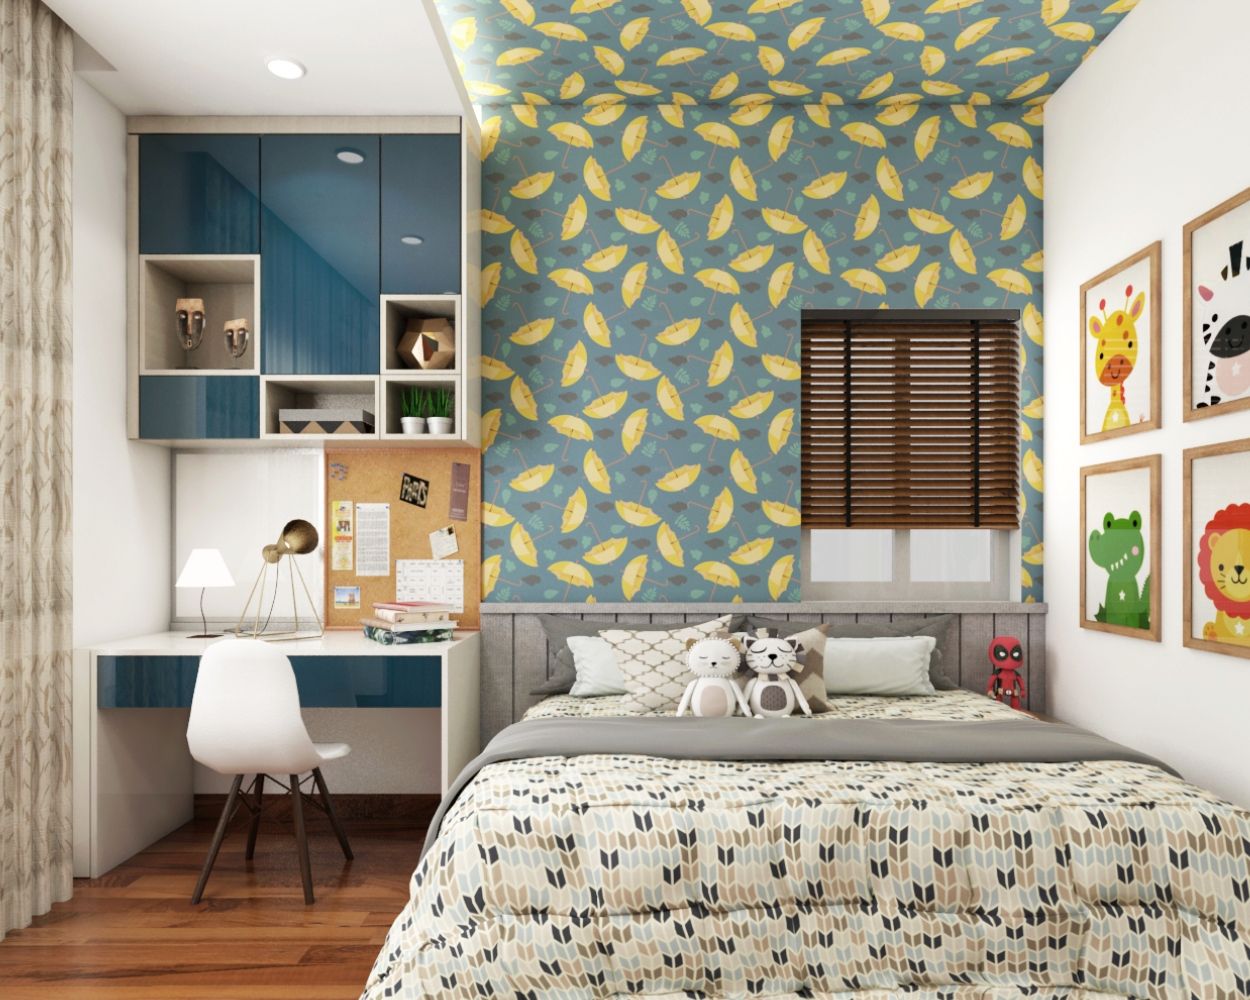 Modern Blue And Yellow Bedroom Wallpaper Design With Umbrella Motifs